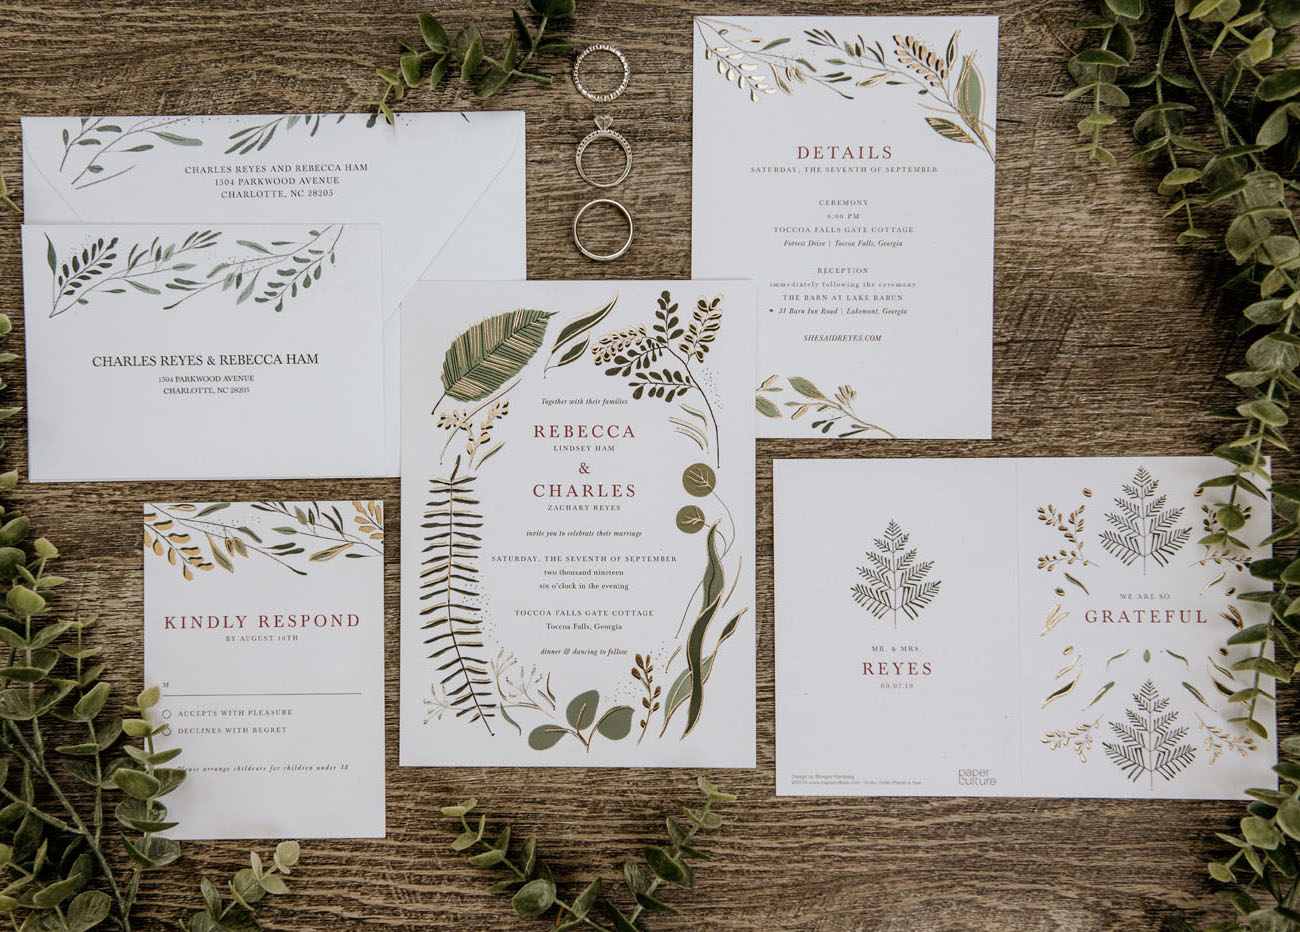 The wedding invitation suite was done with botanical prints